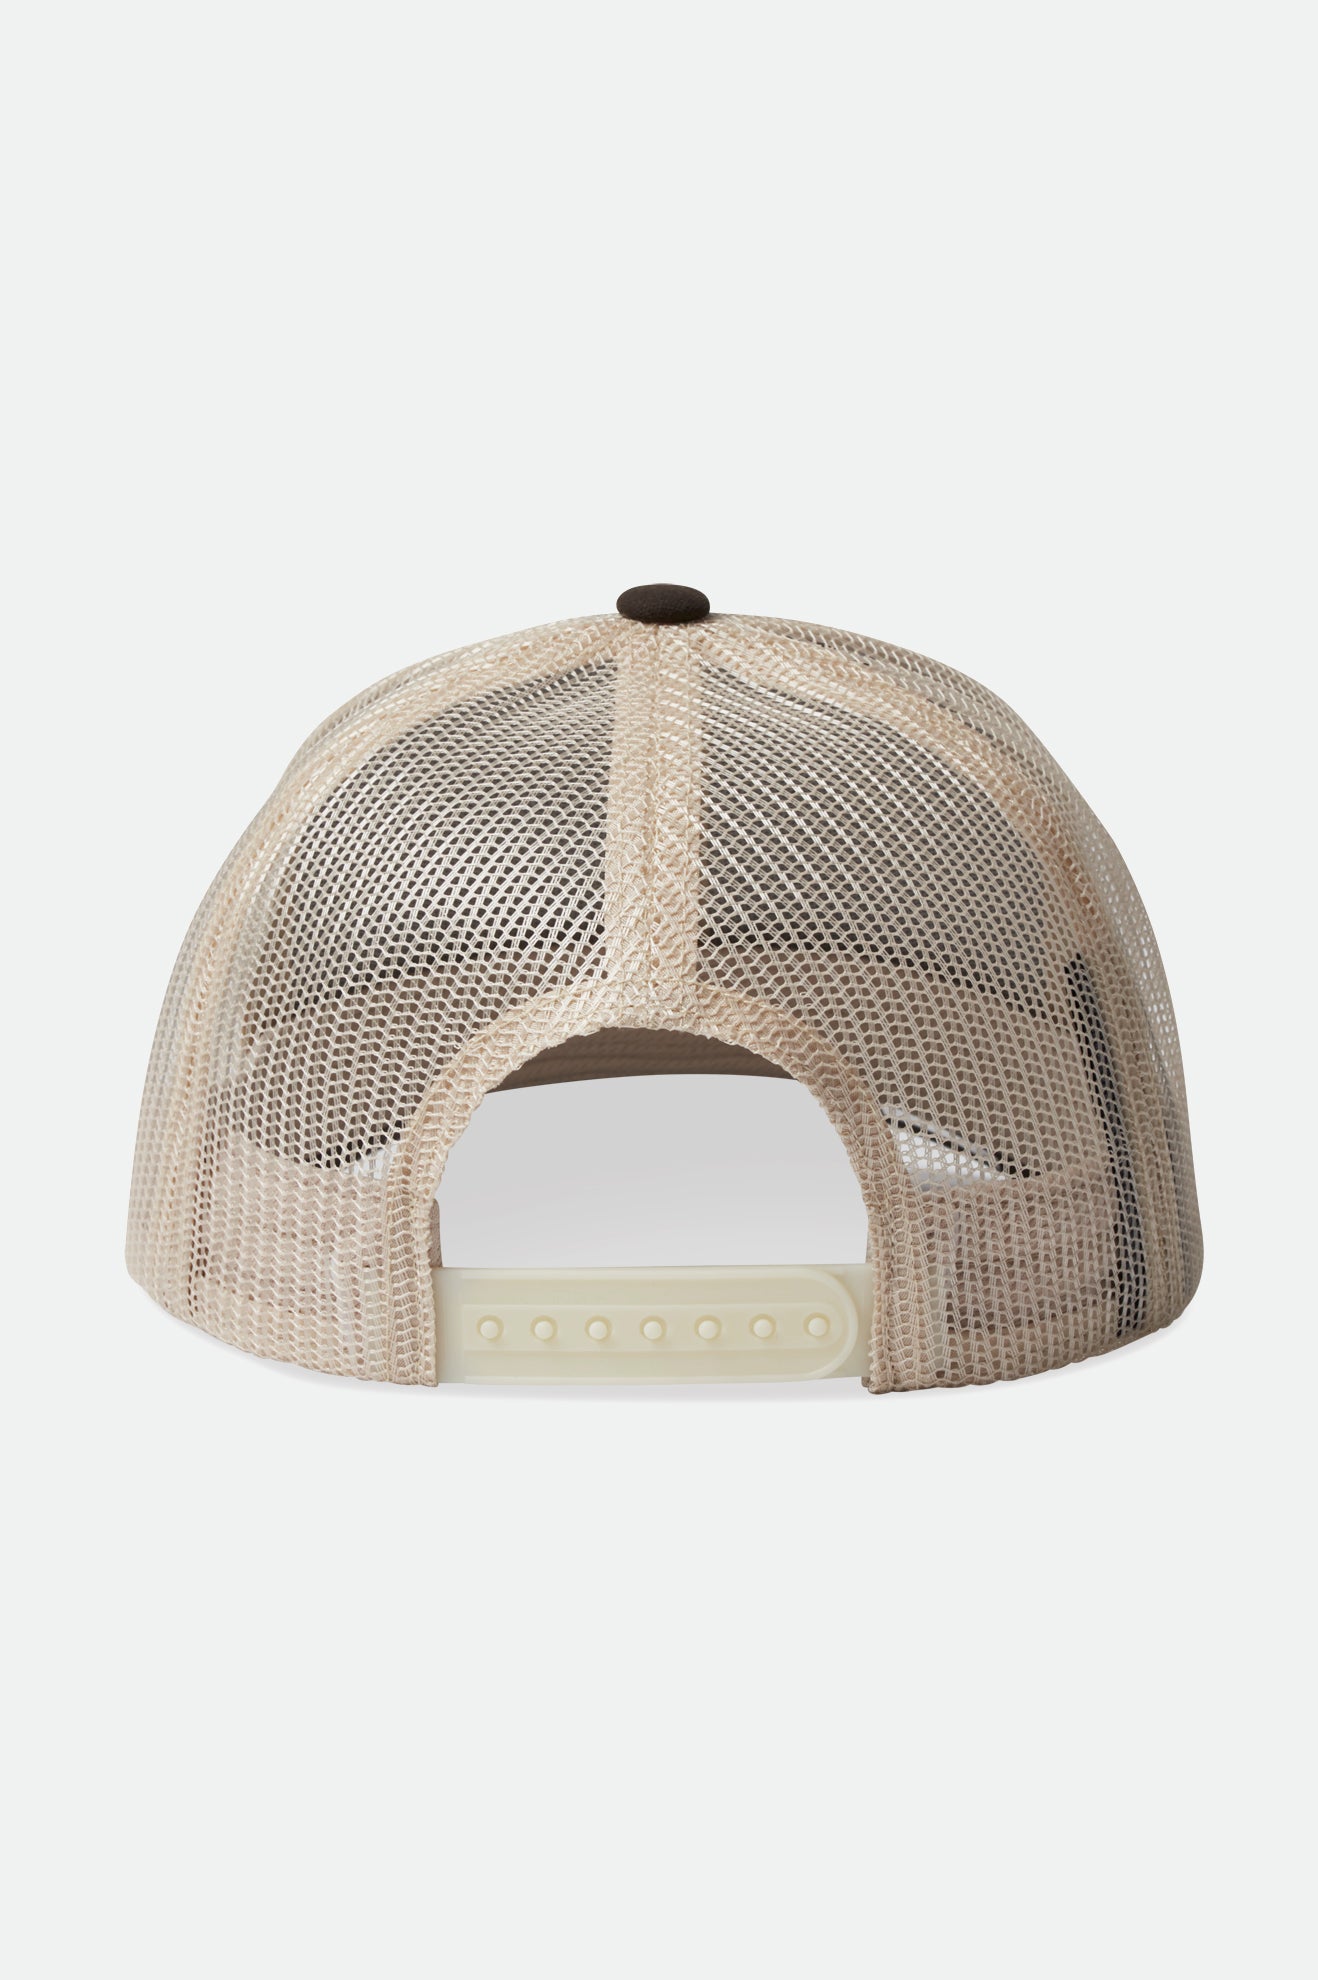 Rival Stamp NetPlus MP Trucker Hat - Deep Brown/Off White – Brixton ...